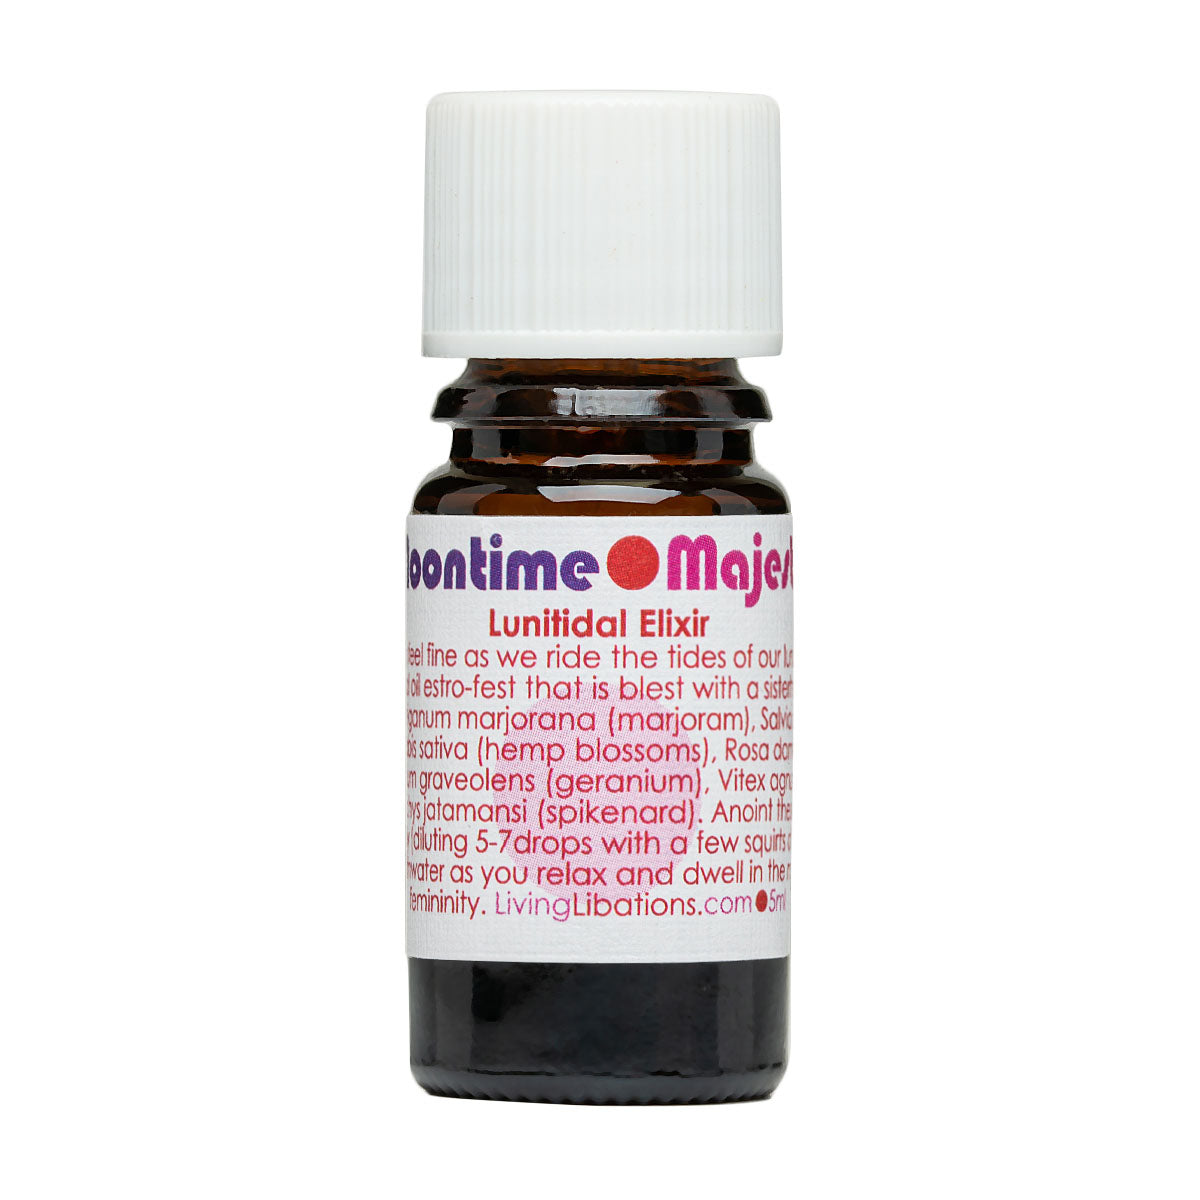 Moontime Majesty Essential Oil | Living Libations | Raw Living UK | Skin Care | Health Nectar | Fragrance | Living Libations Moontime Majesty Essential Oil (5ml): connect with your feminine essence as you ride the waves of your menstrual cycle. Anoint &amp; Diffuse.